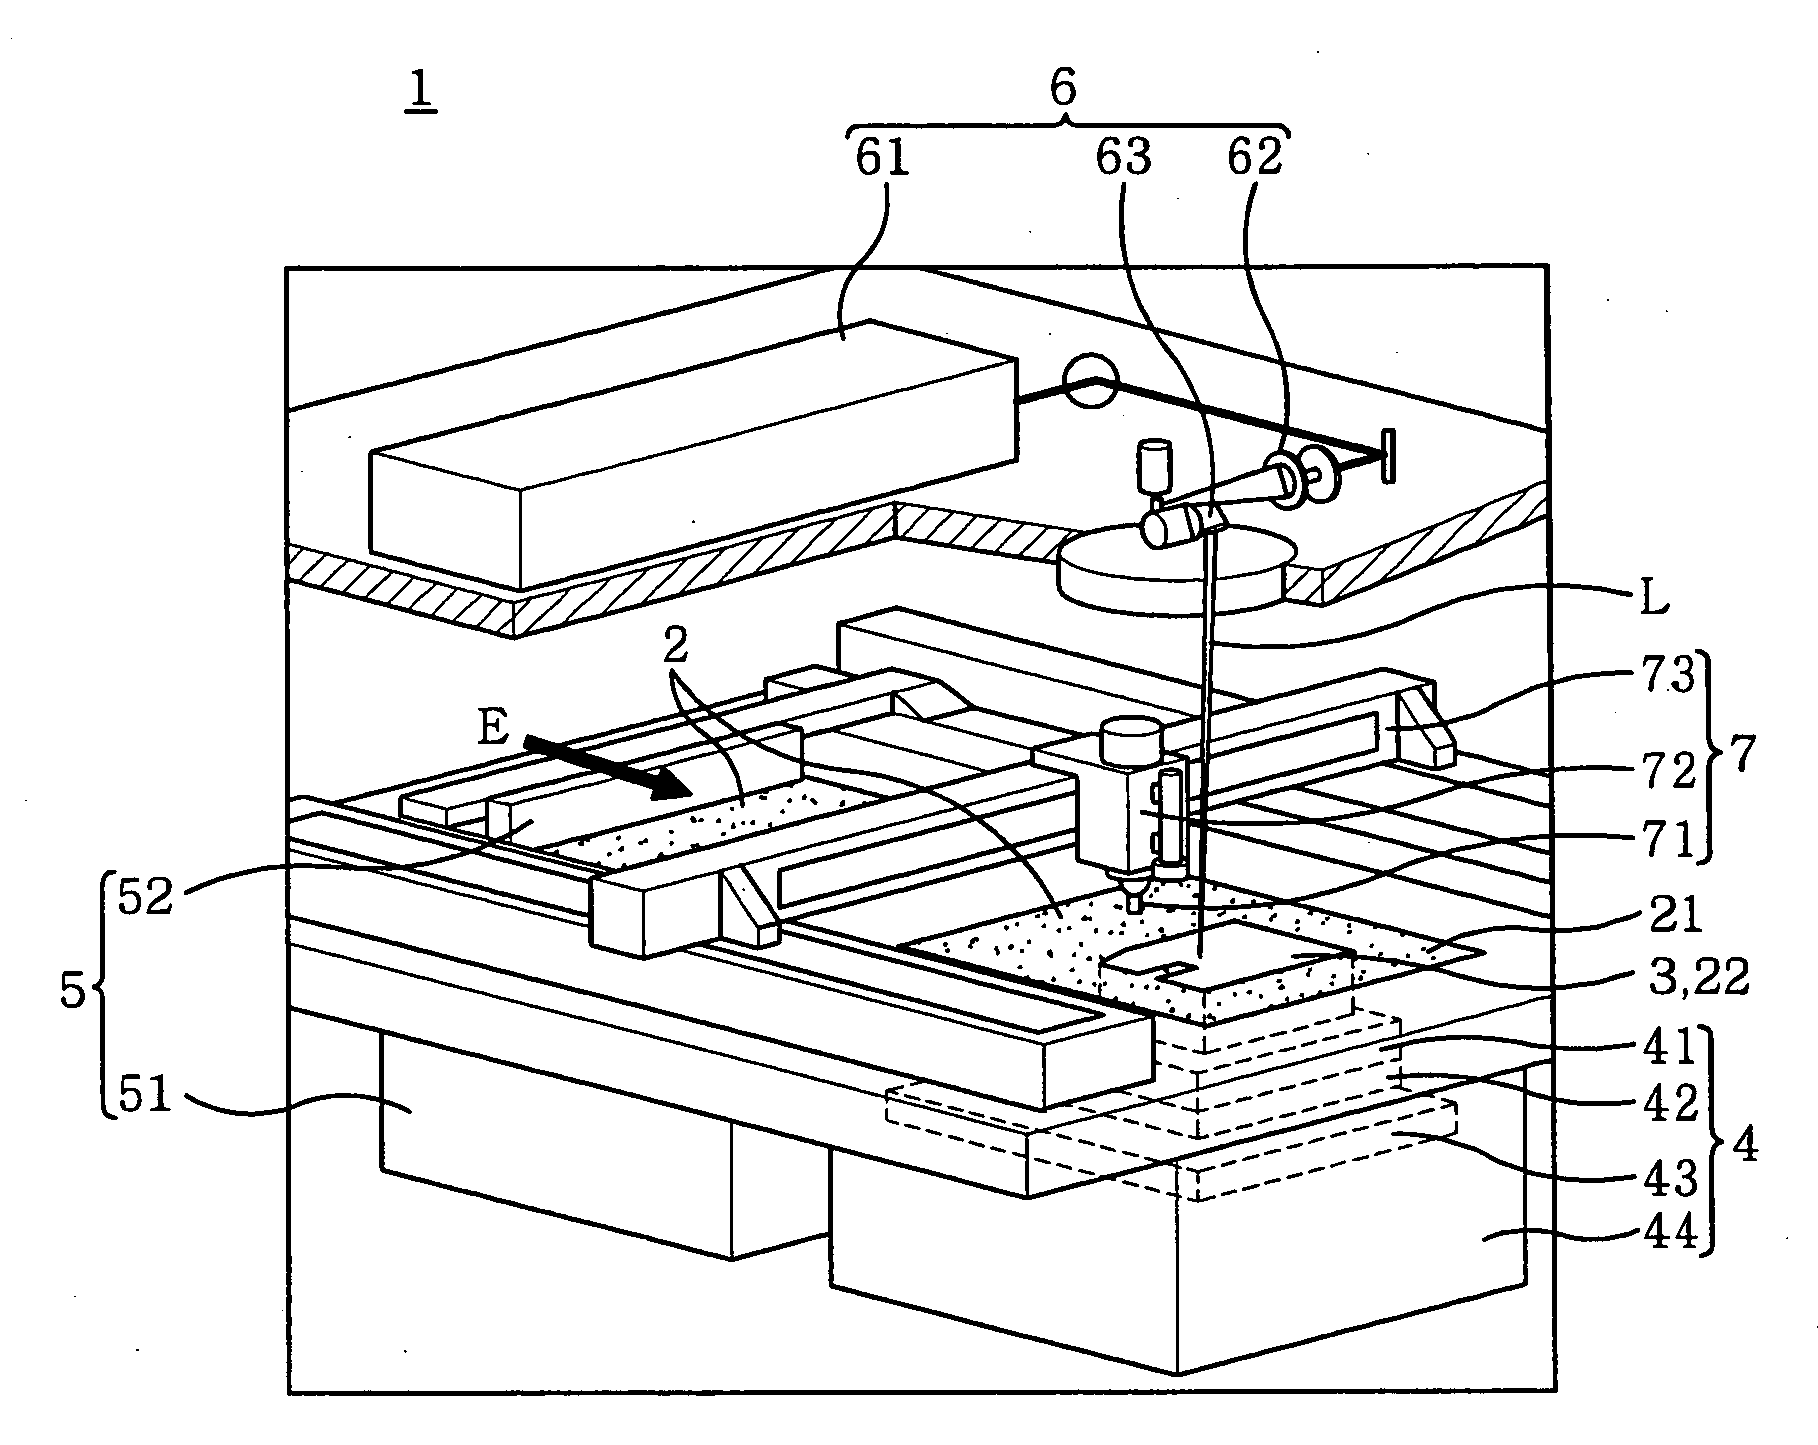 Method for producing a three-dimensionally shaped object